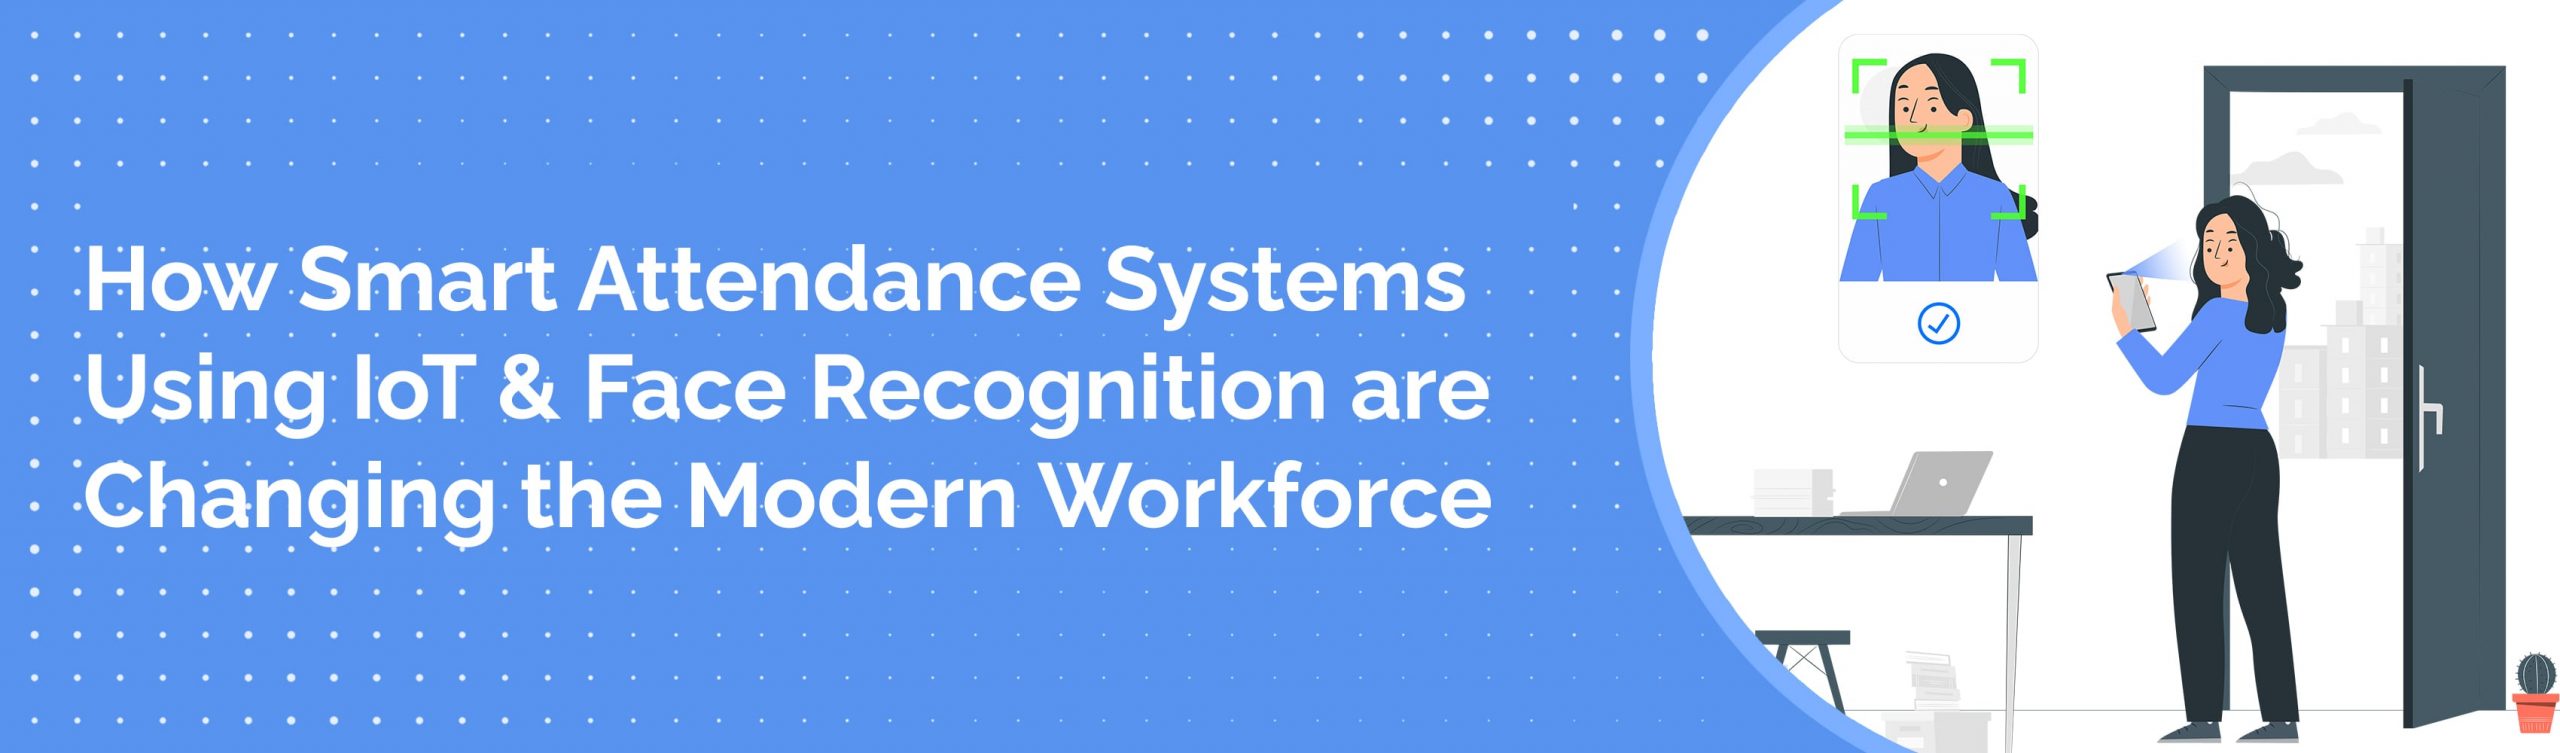 How Smart Attendance Systems Using IoT & Face Recognition are Changing the Modern Workforce